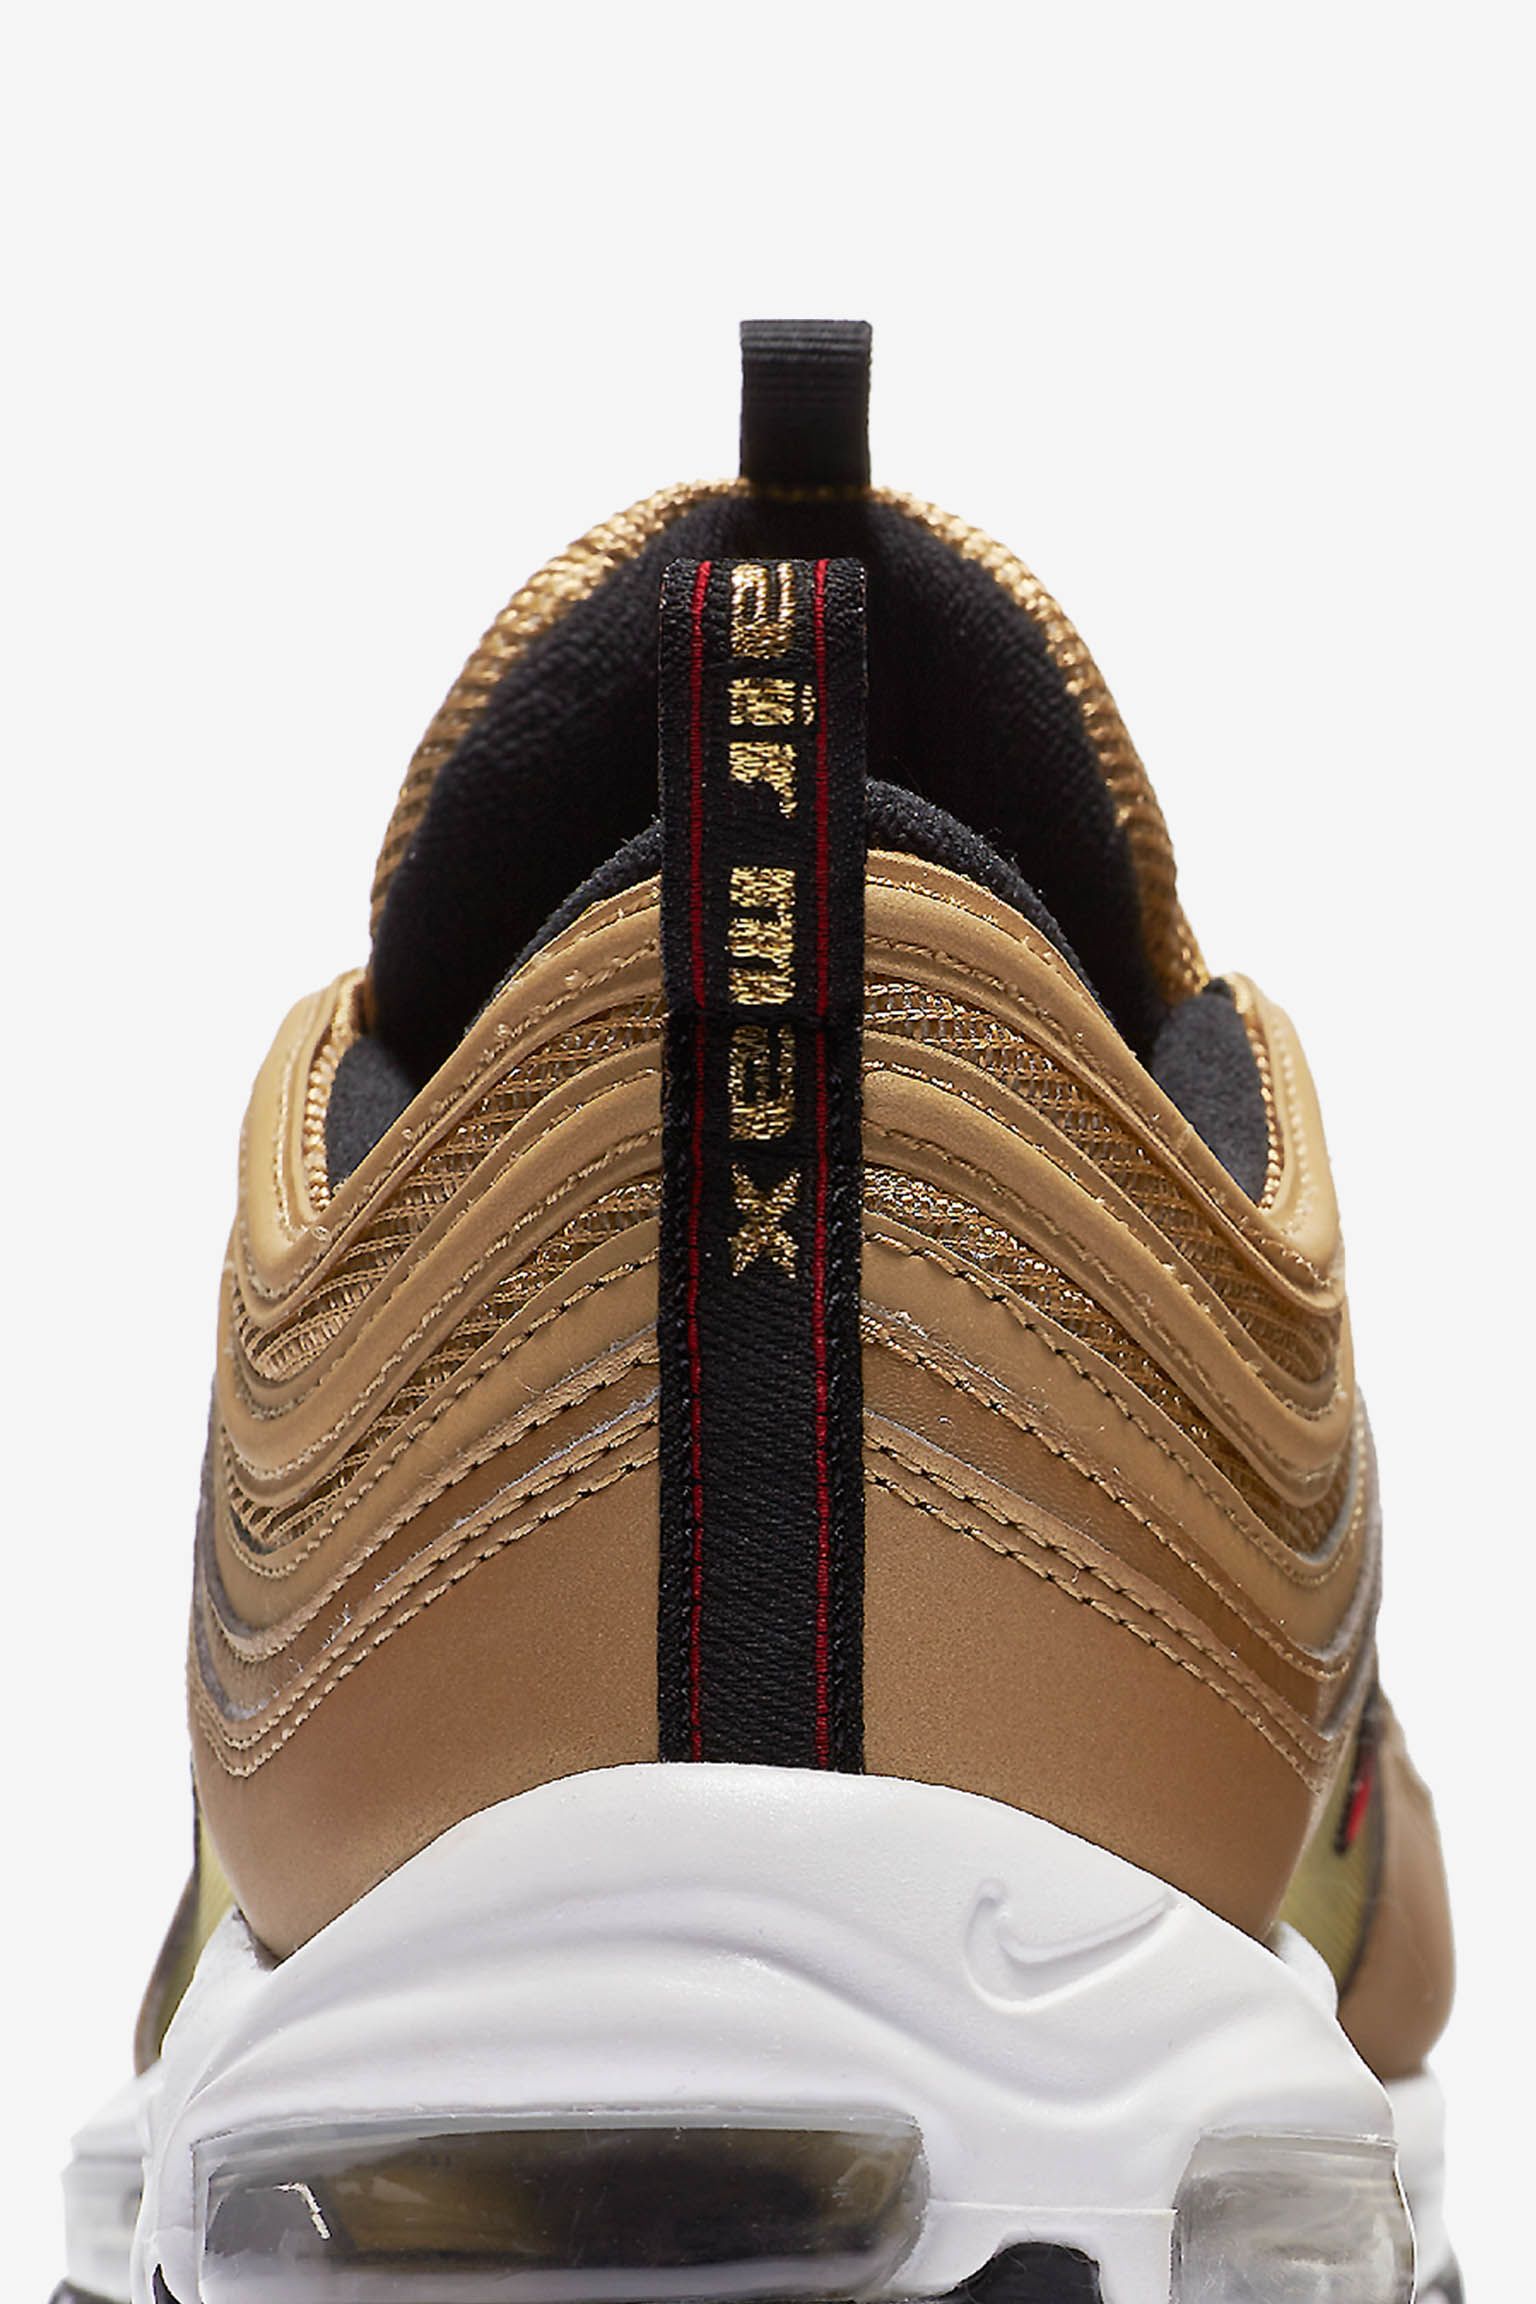 Equipment One hundred years carbon Nike Air Max 97 OG QS 'Metallic Gold' Release Date. Nike SNKRS